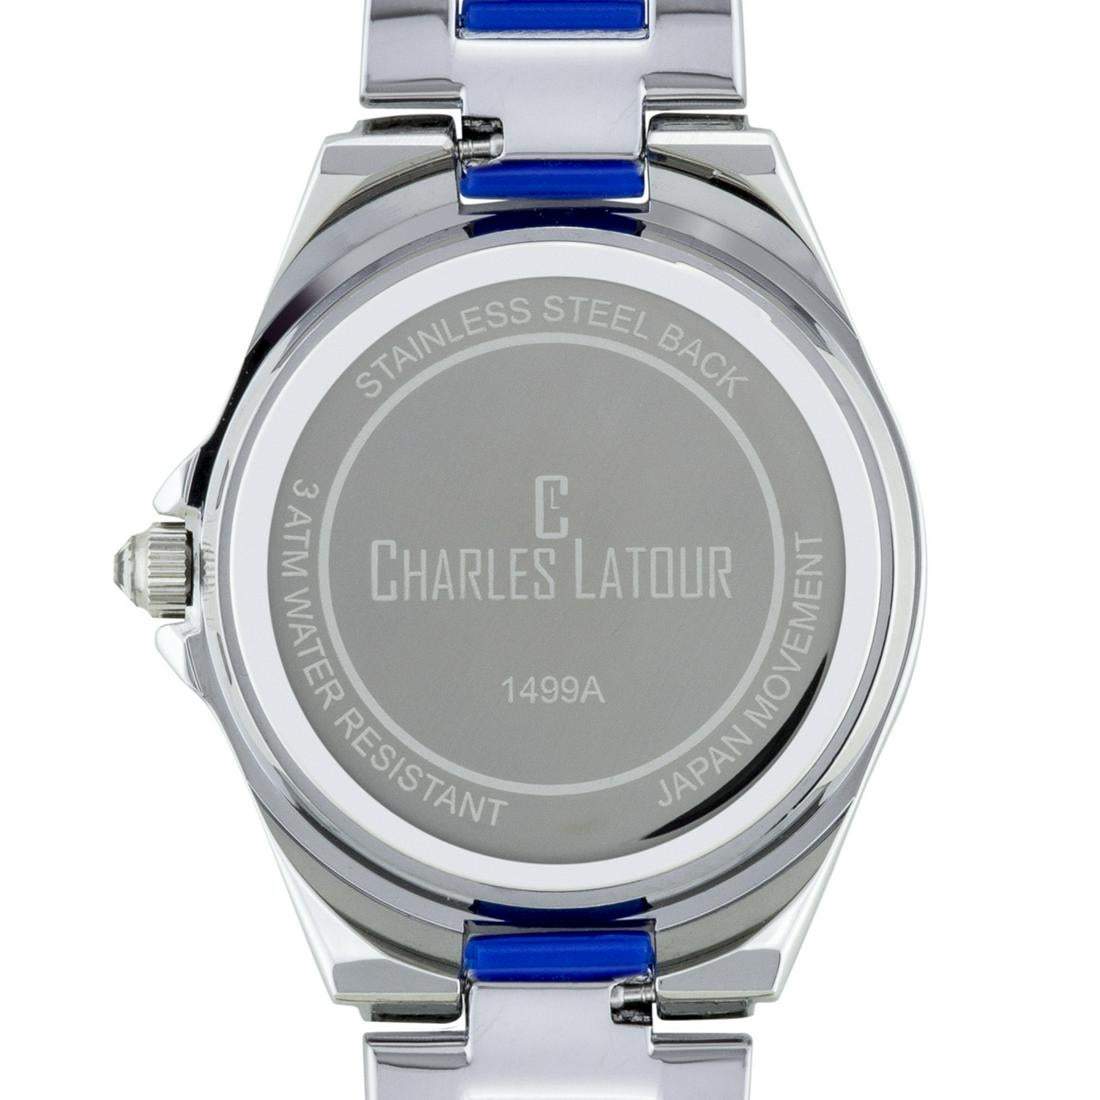 Charles Latour Pearlized Dial Core with Crystal Bezel Ladies Watch - Shop Thrifty Treasures